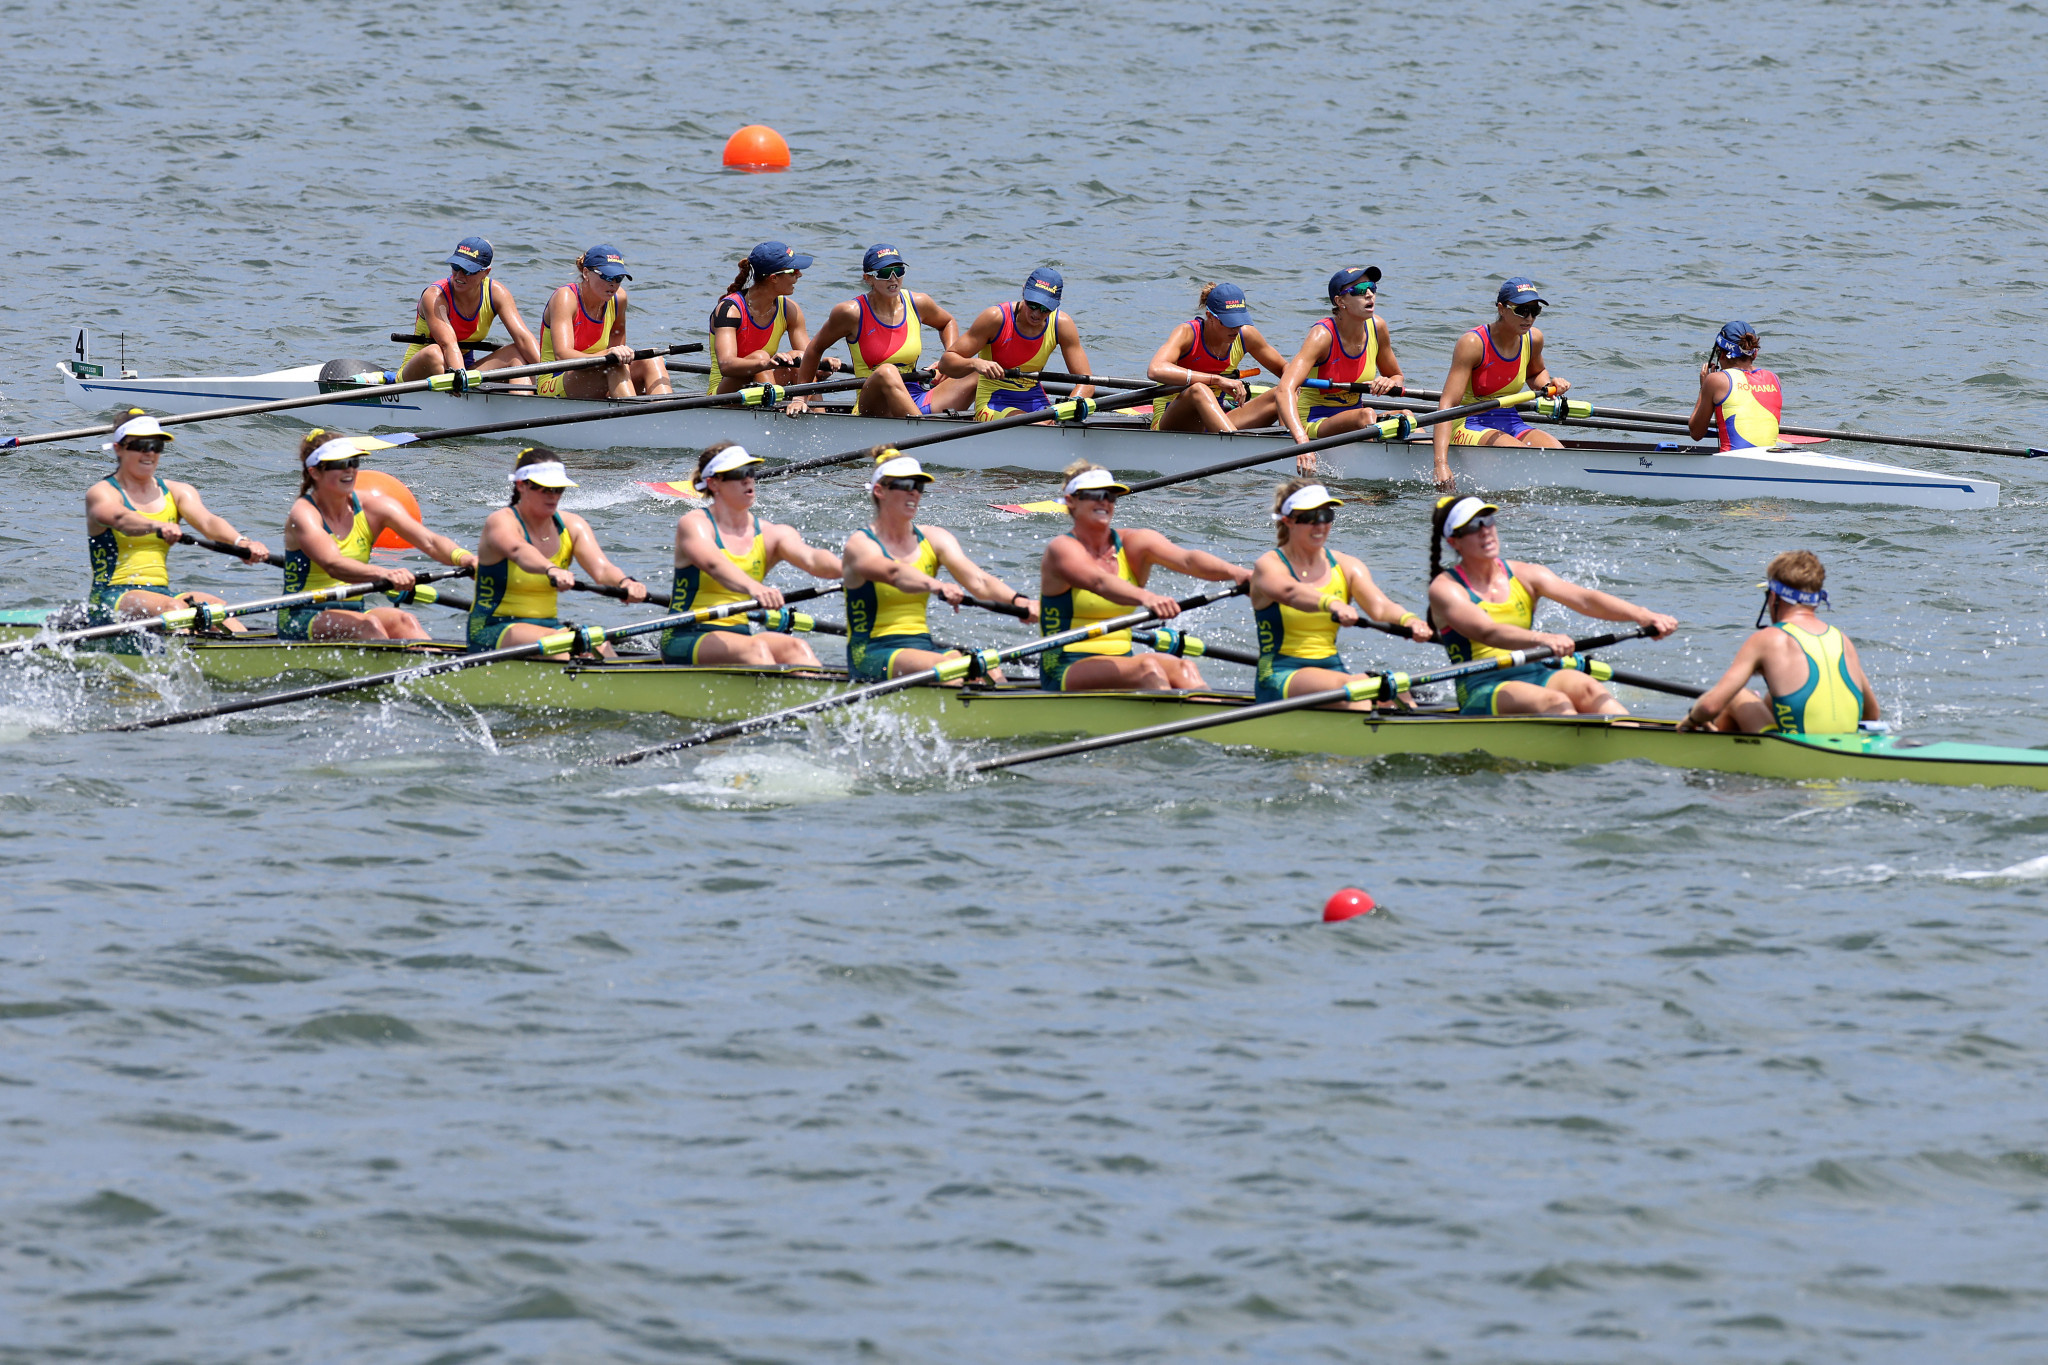 Traditional disciplines of rowing have been excluded from a World Rowing bid to be included at Victoria 2026 ©Getty Images